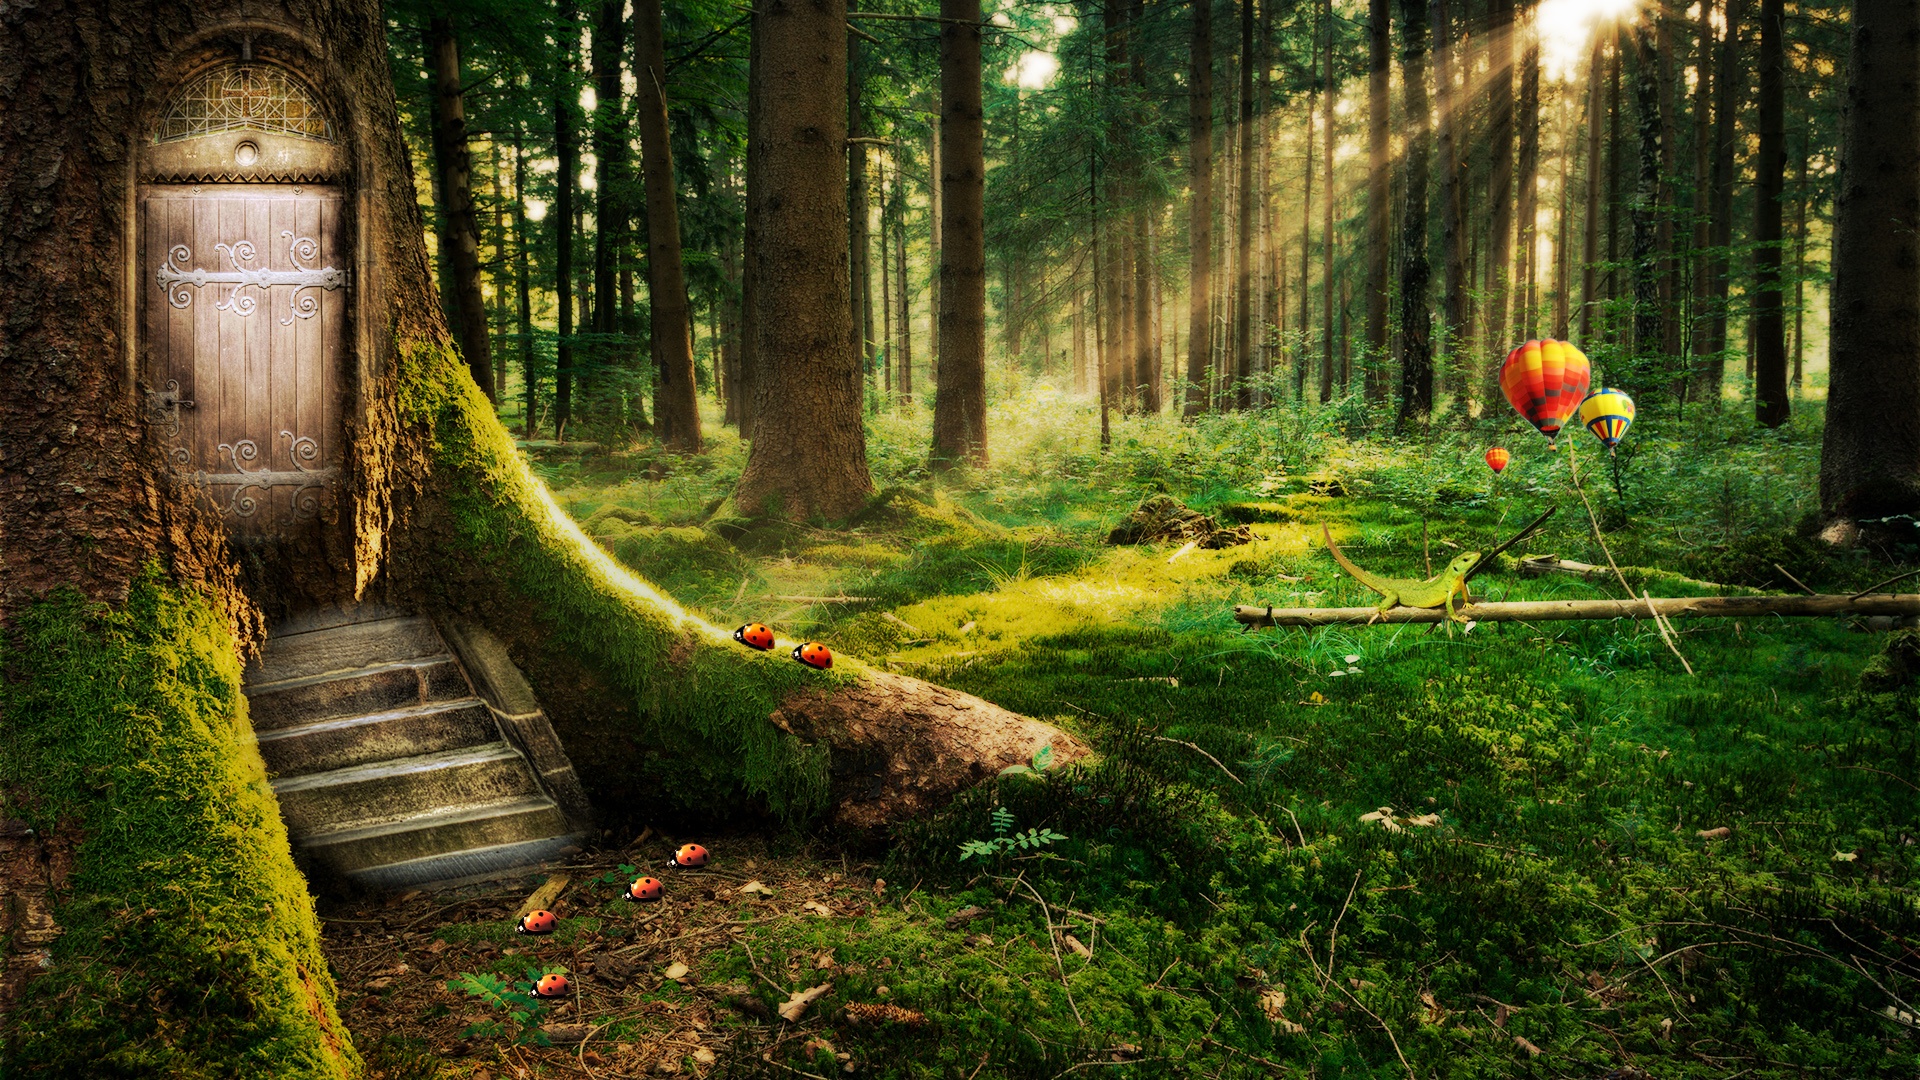 Enchanted Forest Wallpaper HD